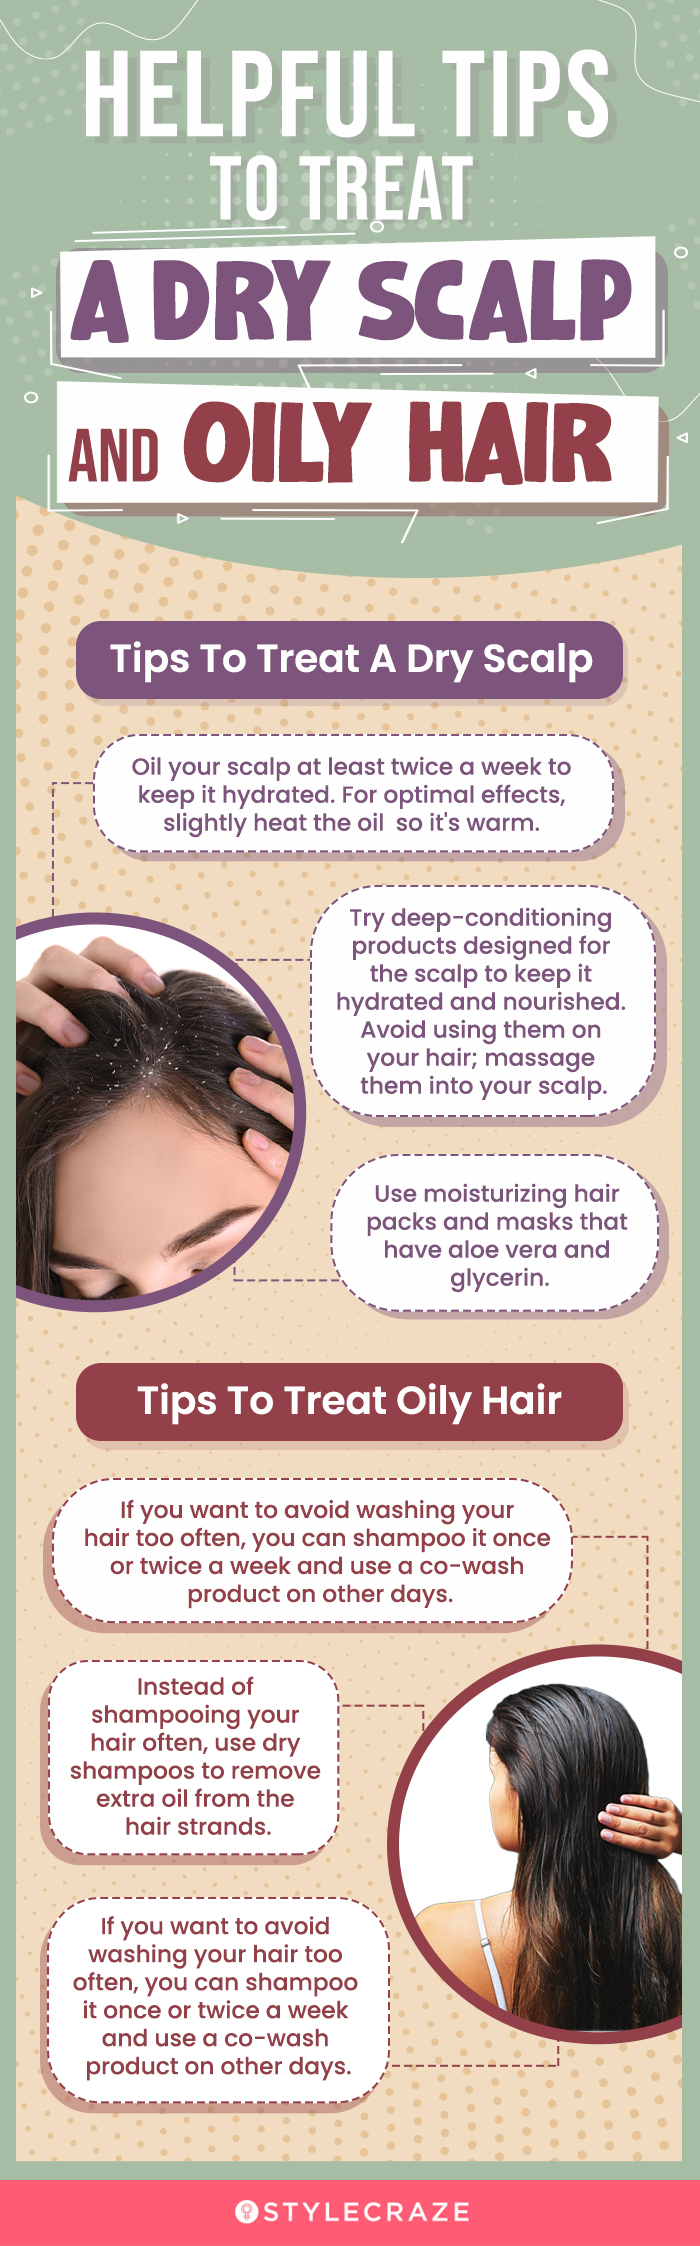 How Do You Treat A Dry Scalp And Oily Hair